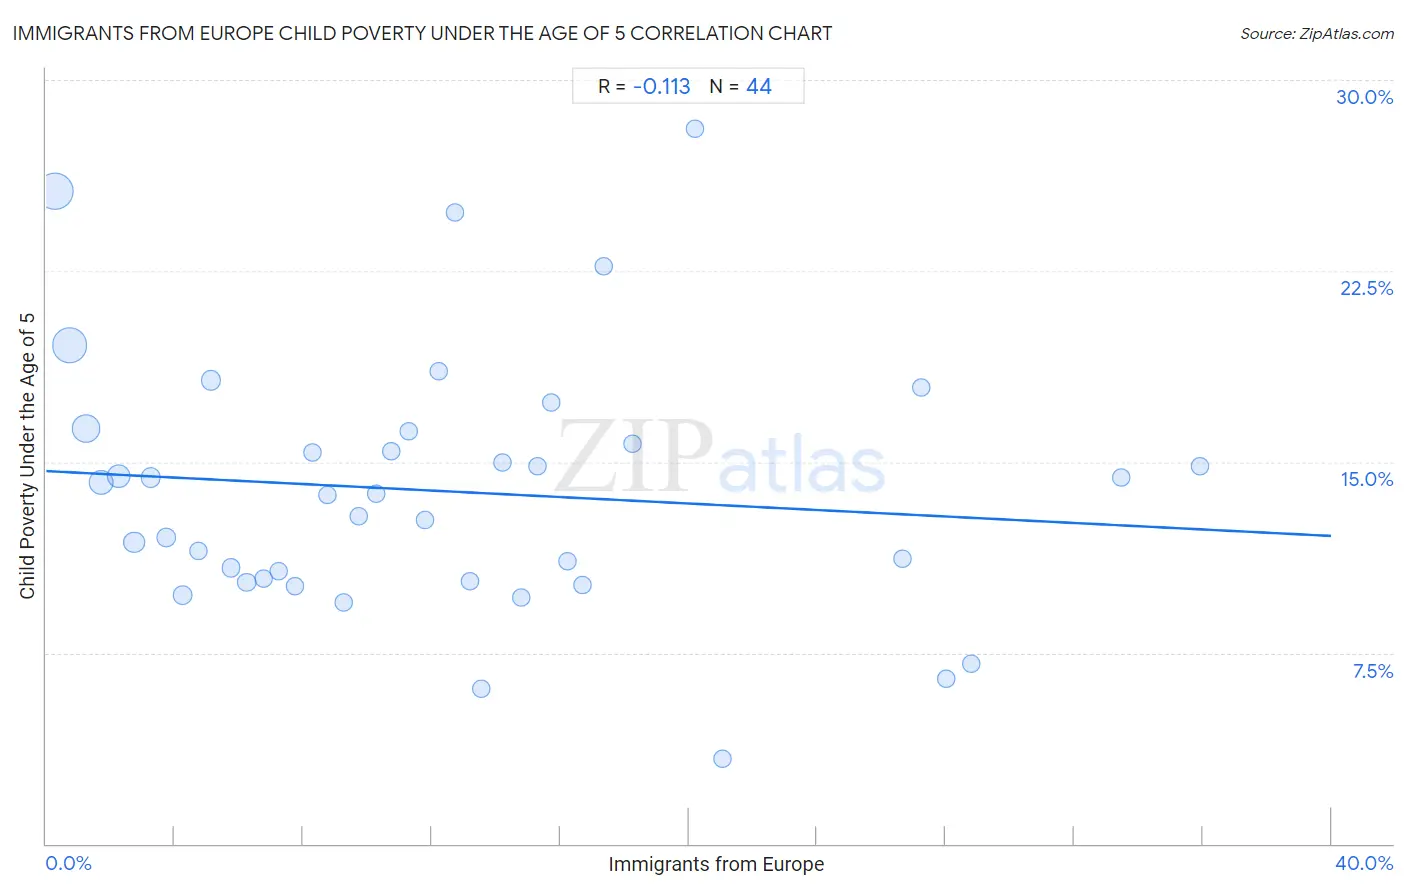 Immigrants from Europe Child Poverty Under the Age of 5